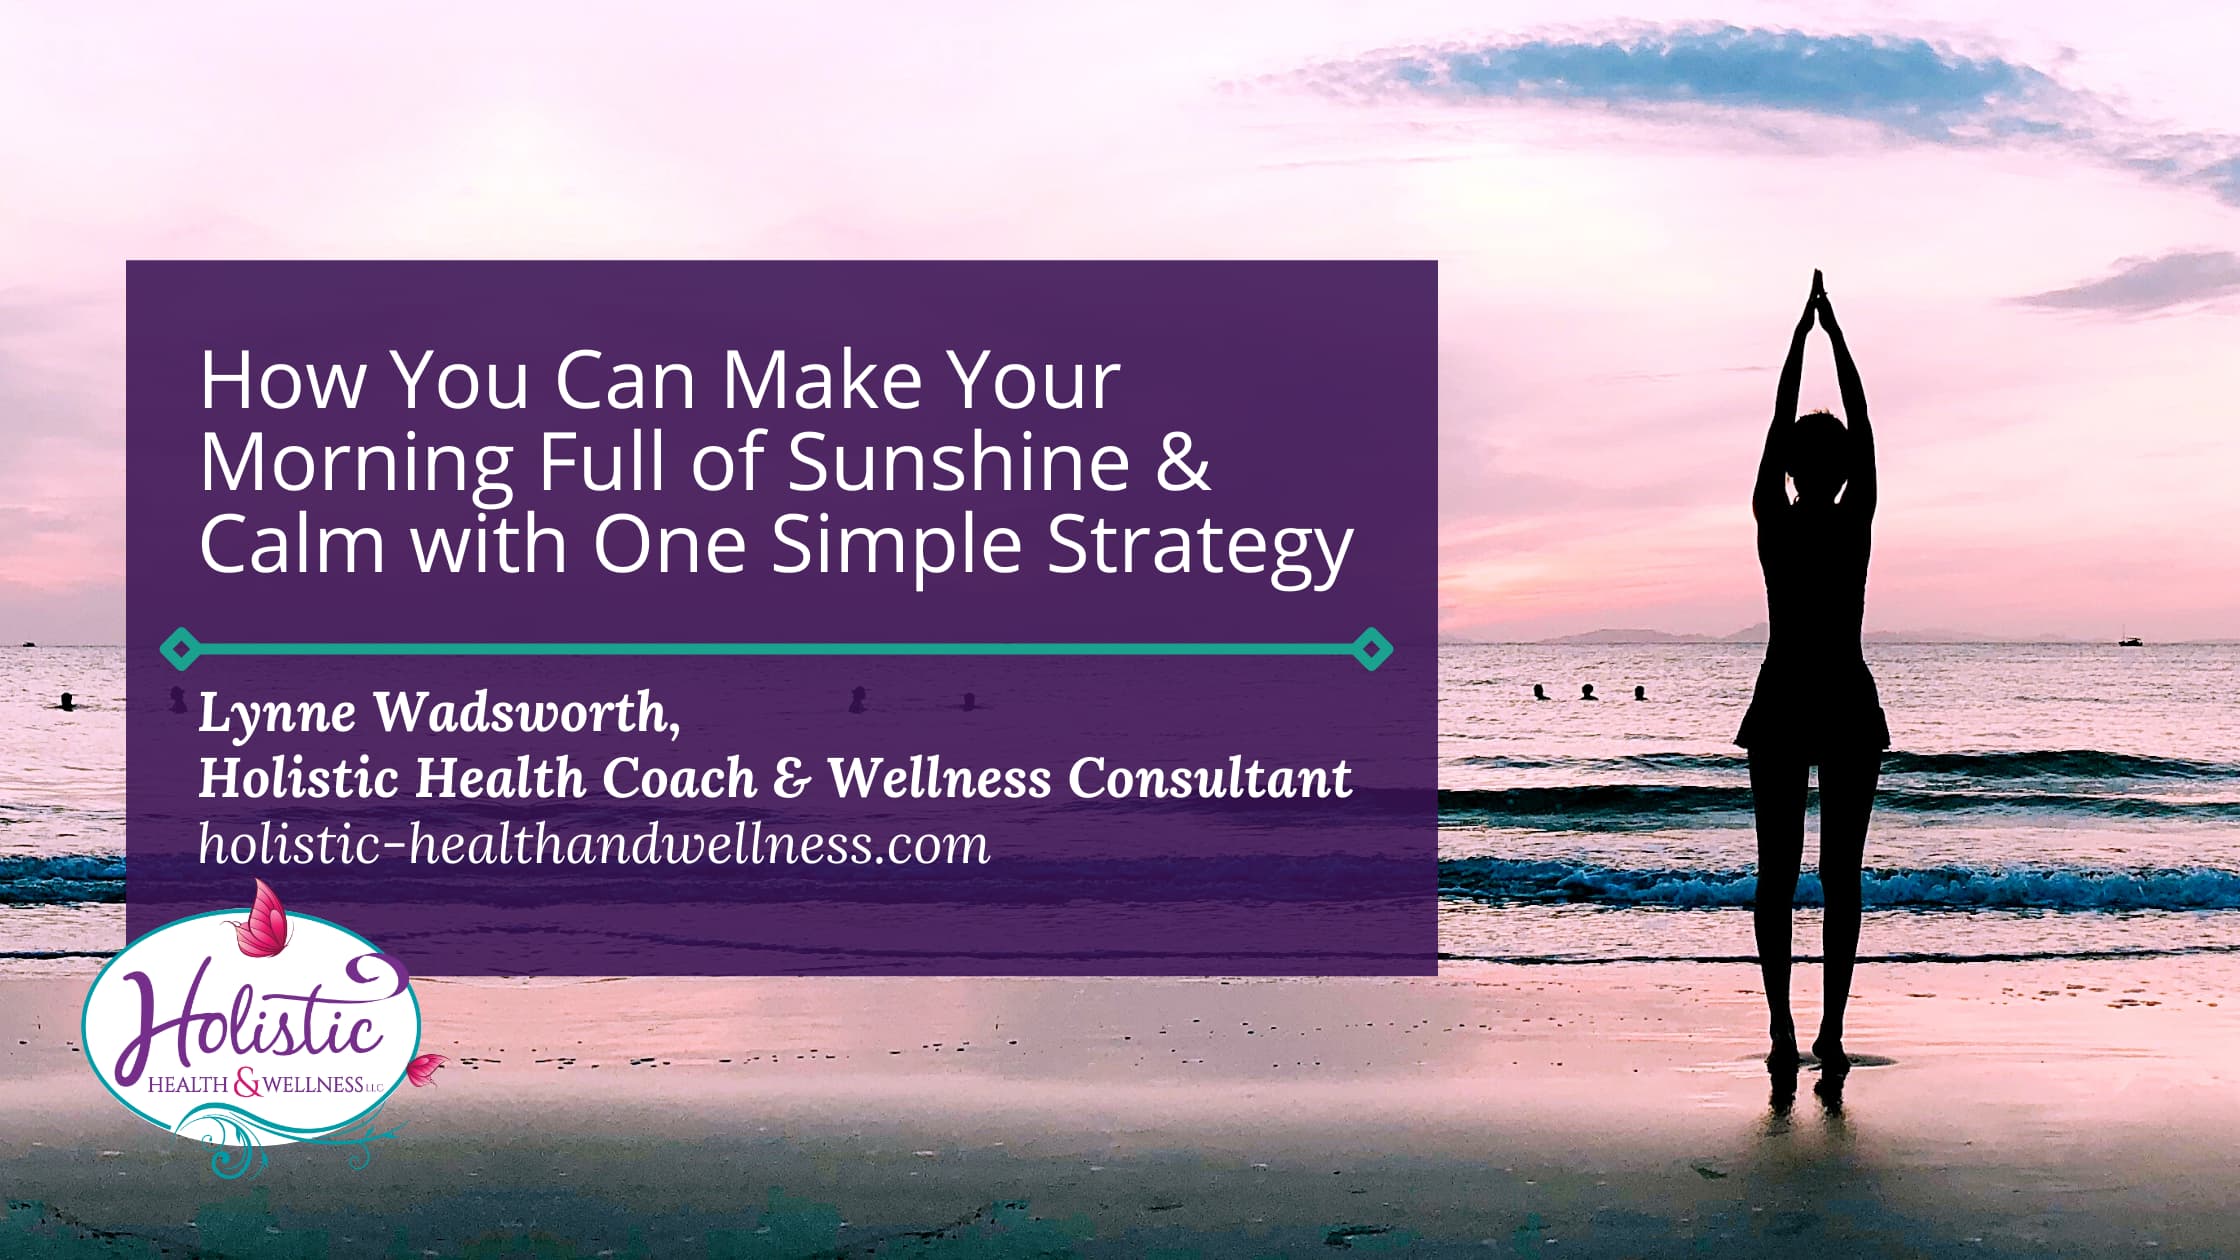 How You Can Make Your Morning Full of Sunshine & Calm with One Simple Strategy